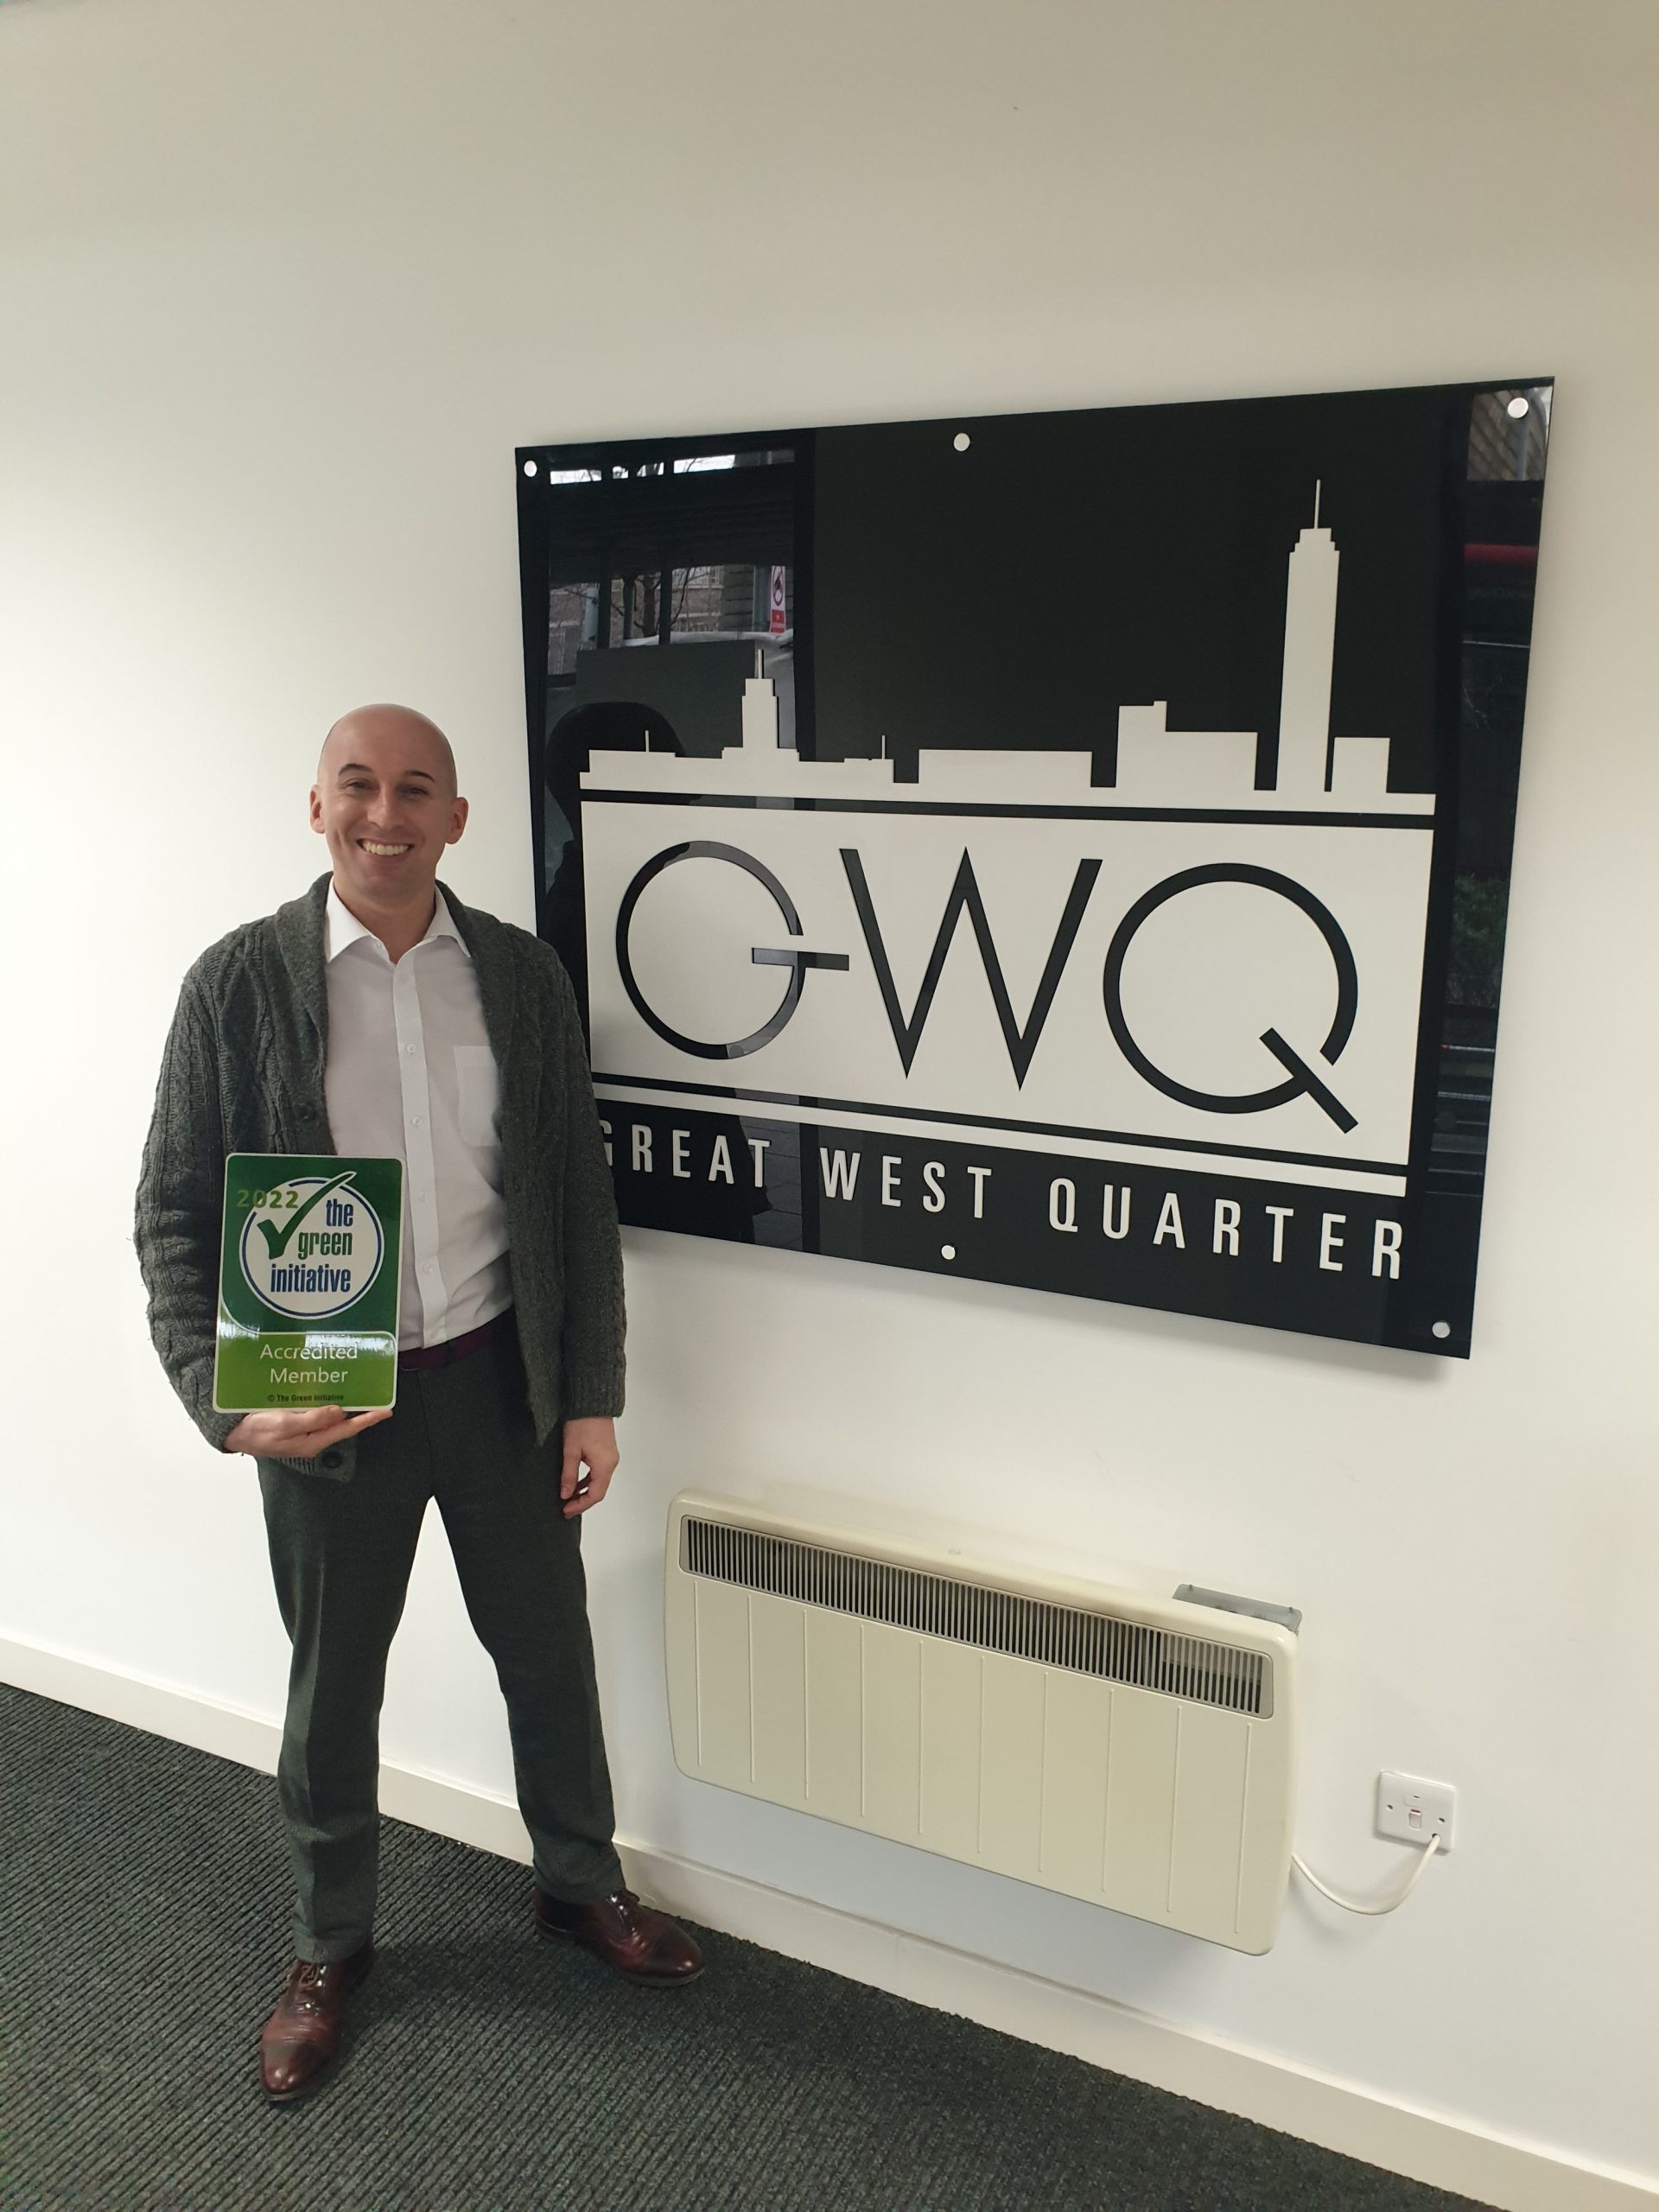 Great West Quarter Join The Green Initiative